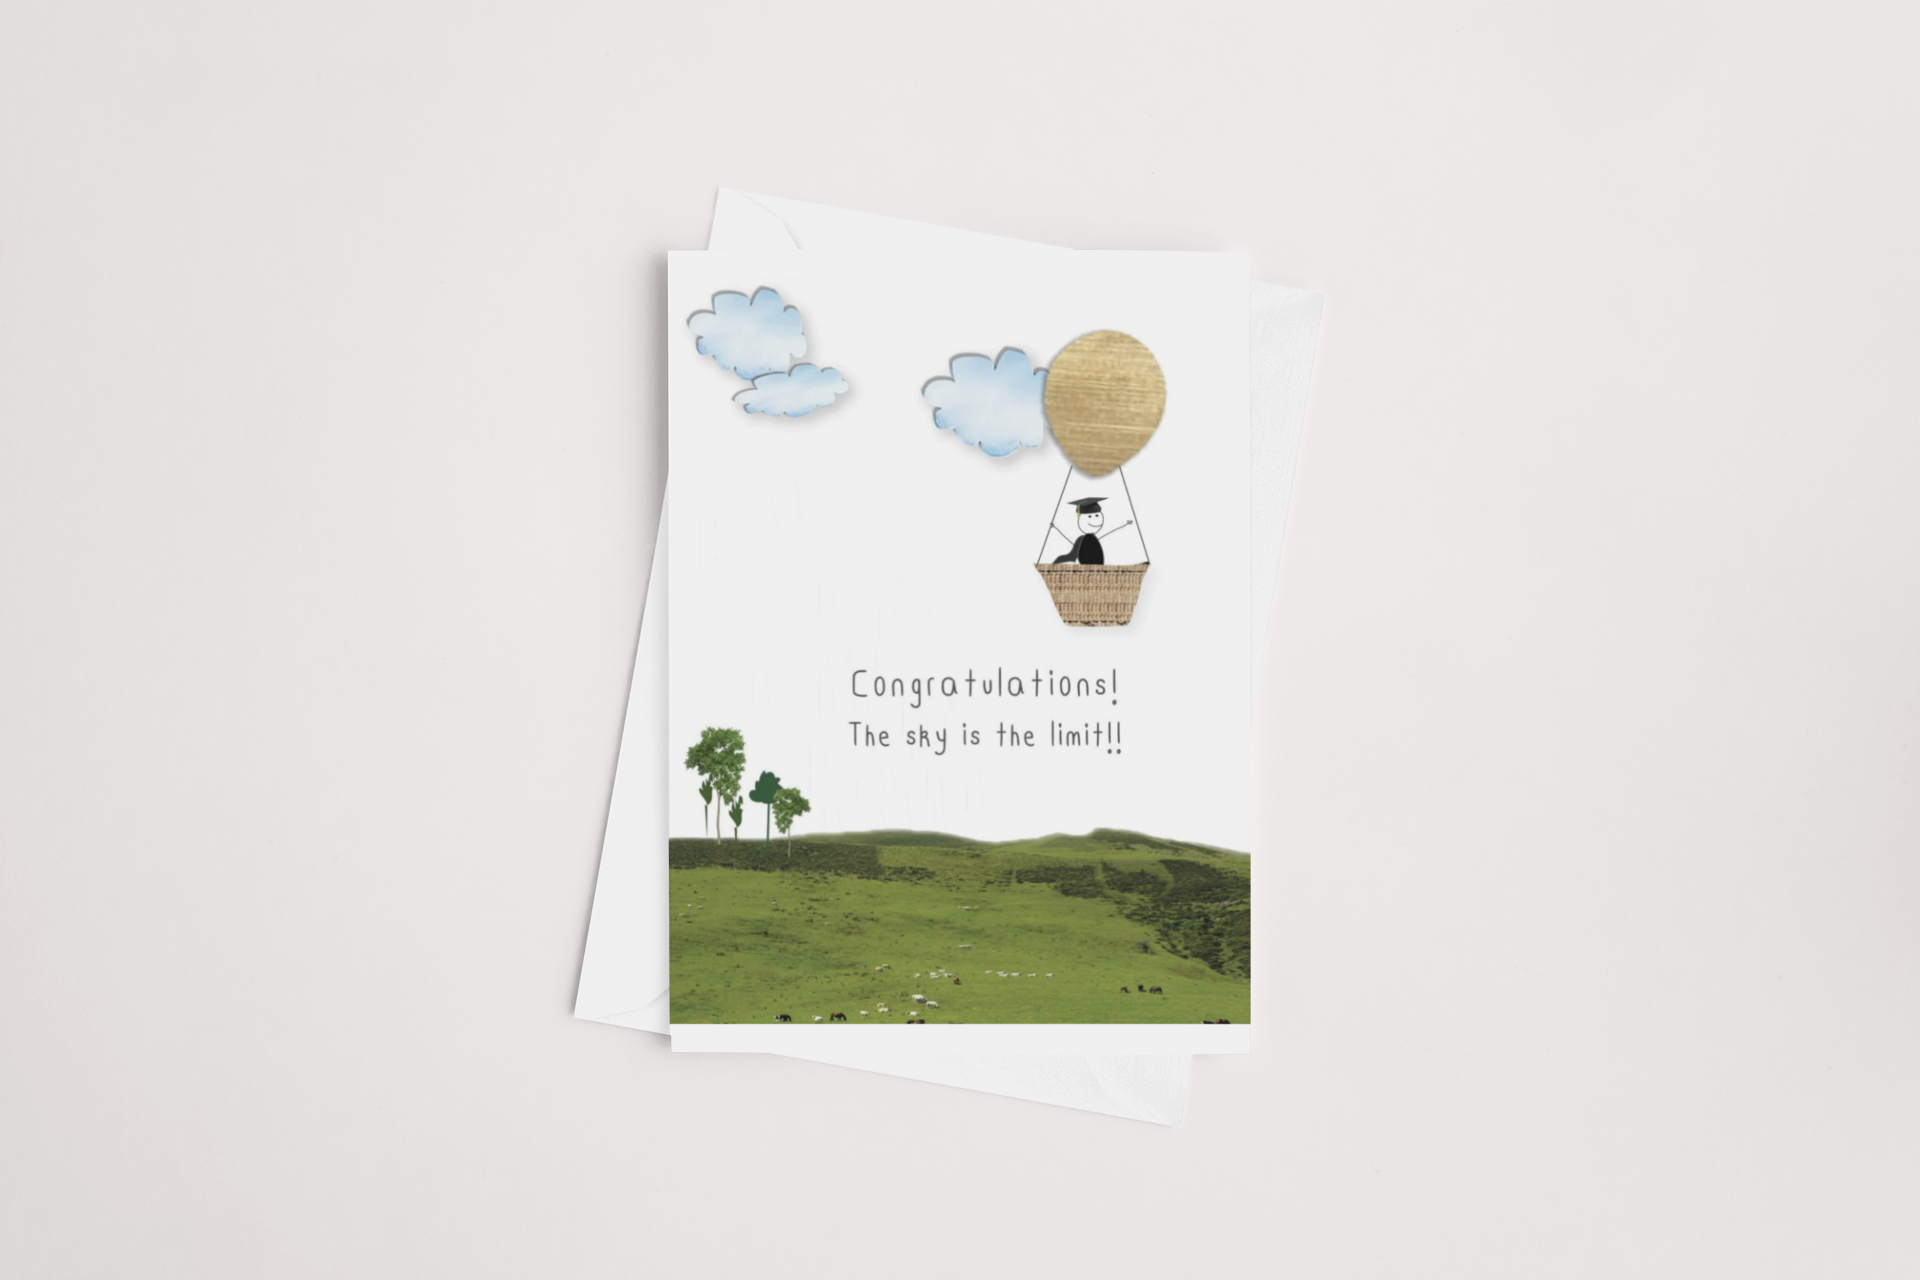 A Kiwi Graduation Card with a pastoral scene and a hot air balloon, featuring the congratulatory phrase "Congratulations! The sky is the limit!!" This multibuy product of icandy New Zealand is perfect for various occasions.